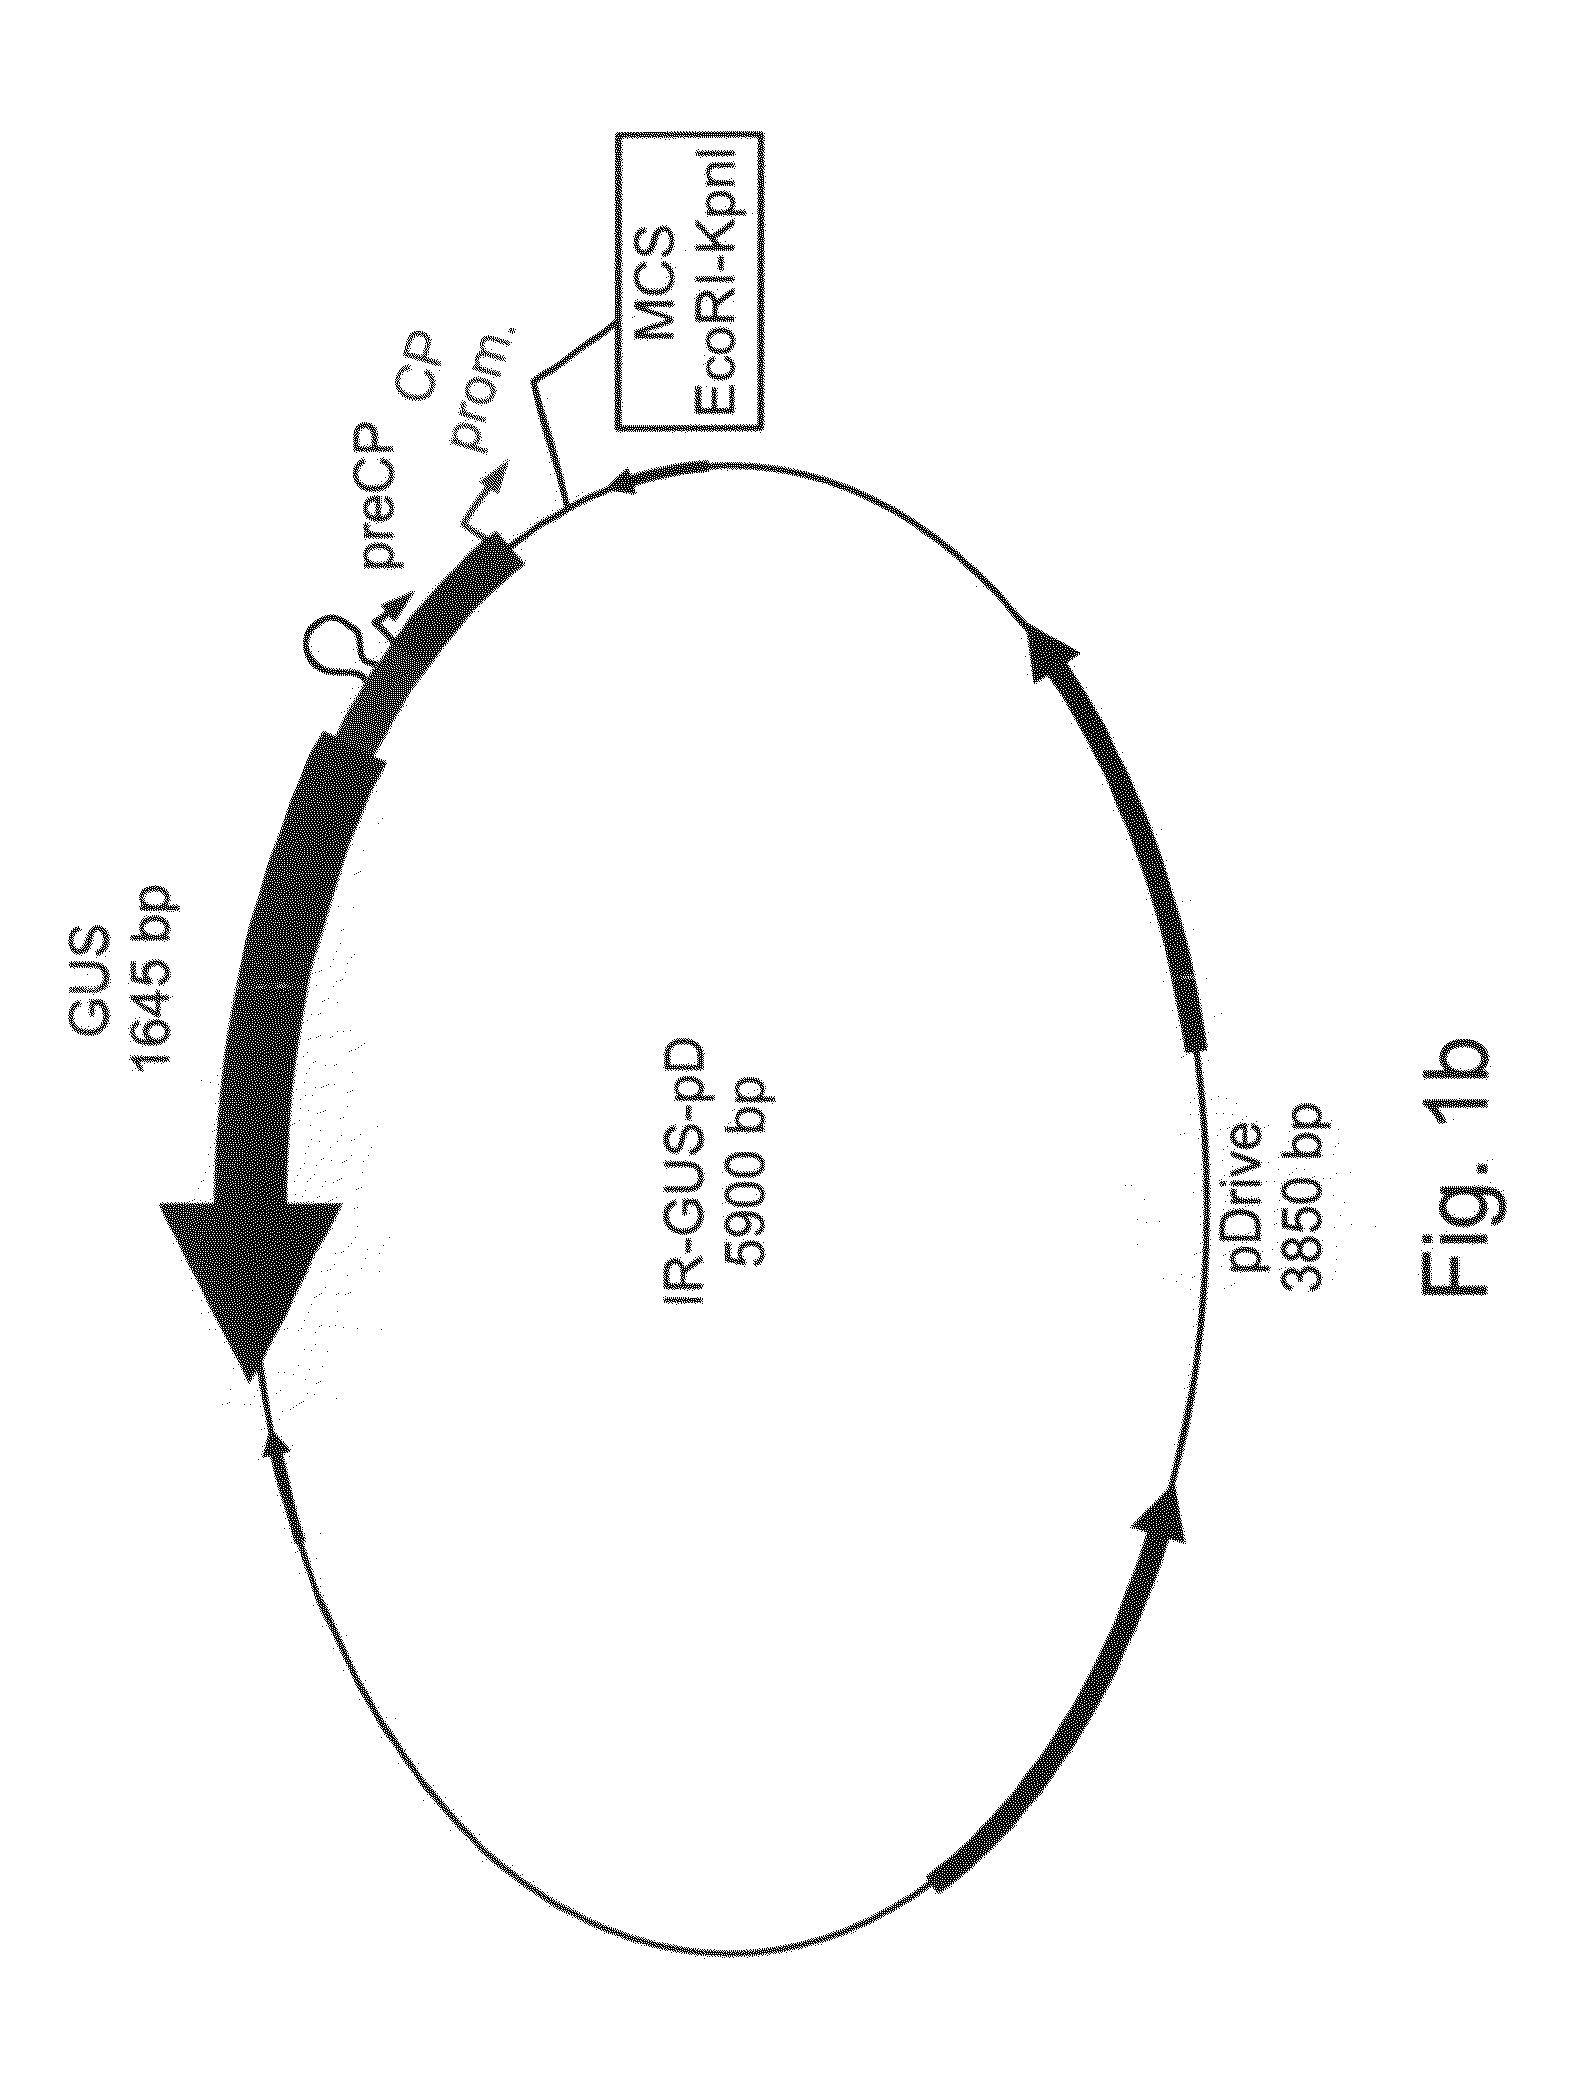 Plant Expression Constructs and Methods of Utilizing Same